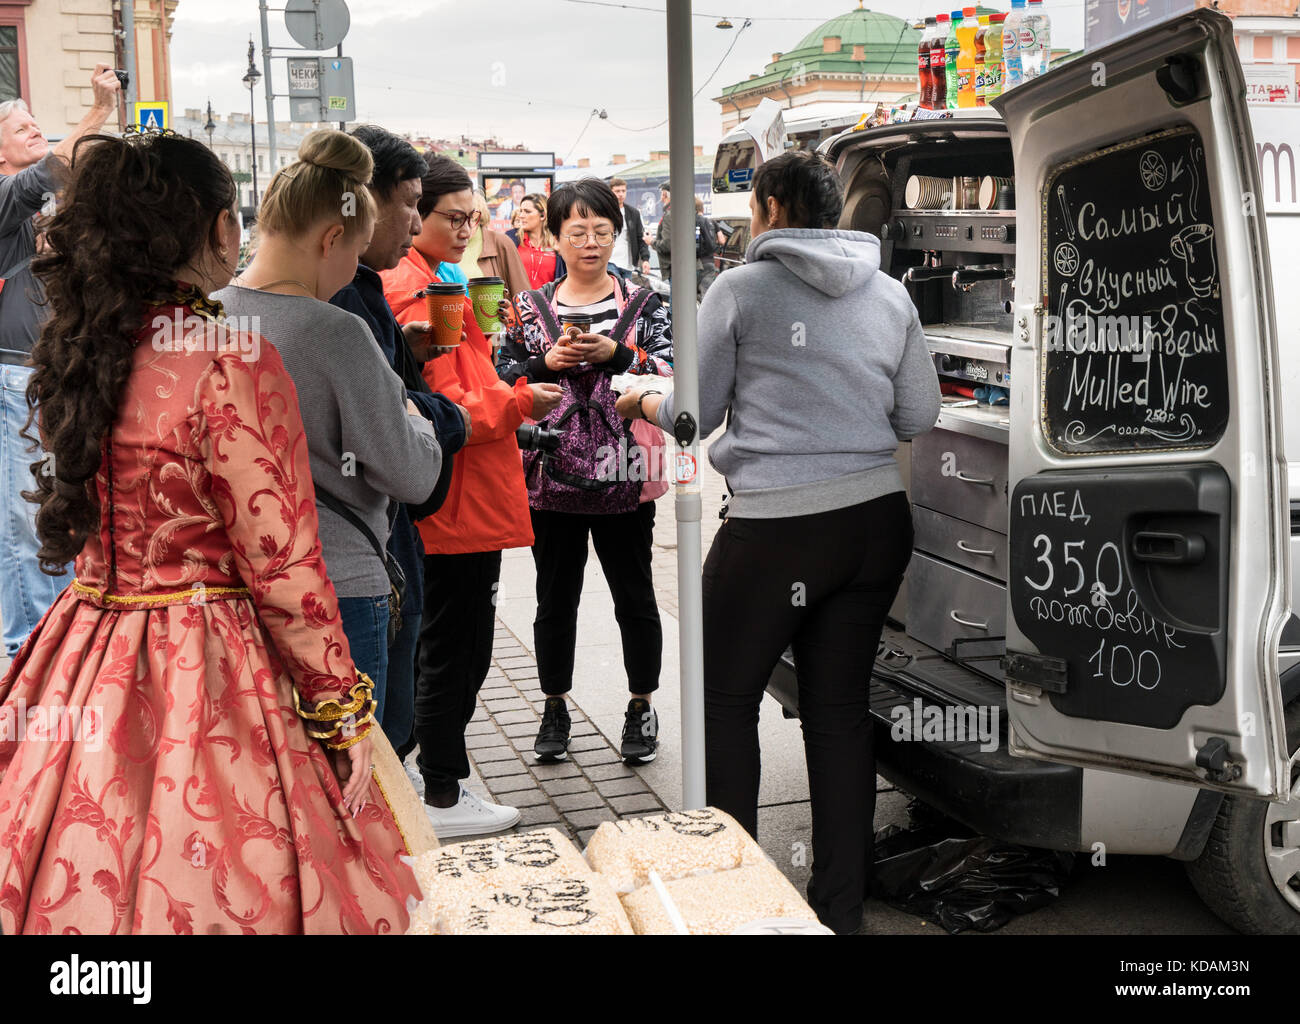 Street vendor with coffee machine in St Petersburg, Russia Stock Photo